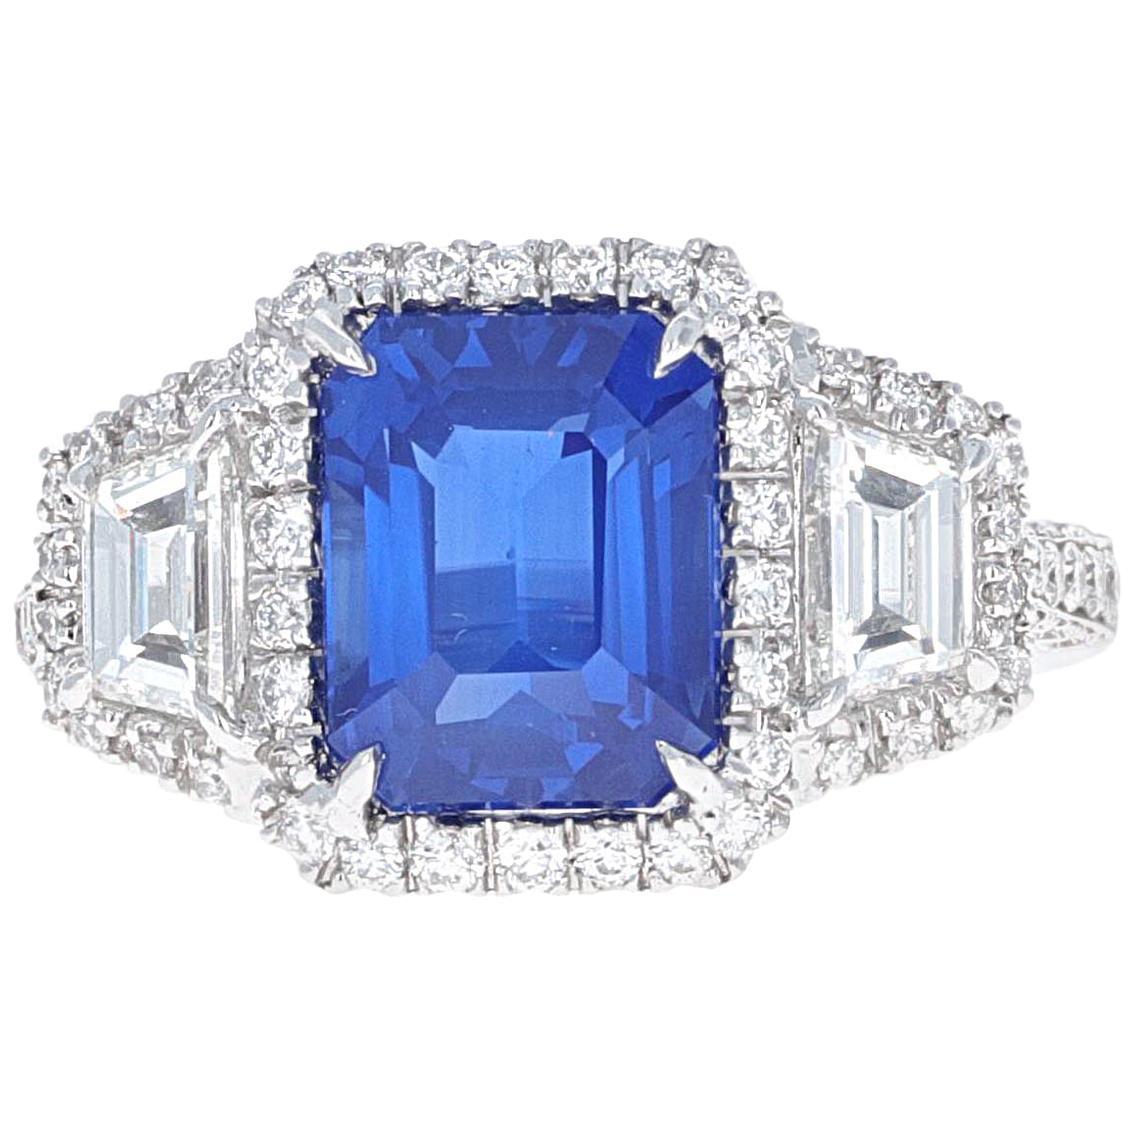 Elizabeth Taylor, House of Taylor 4.50 Carat Sapphire and .96 Carat Diamond Ring